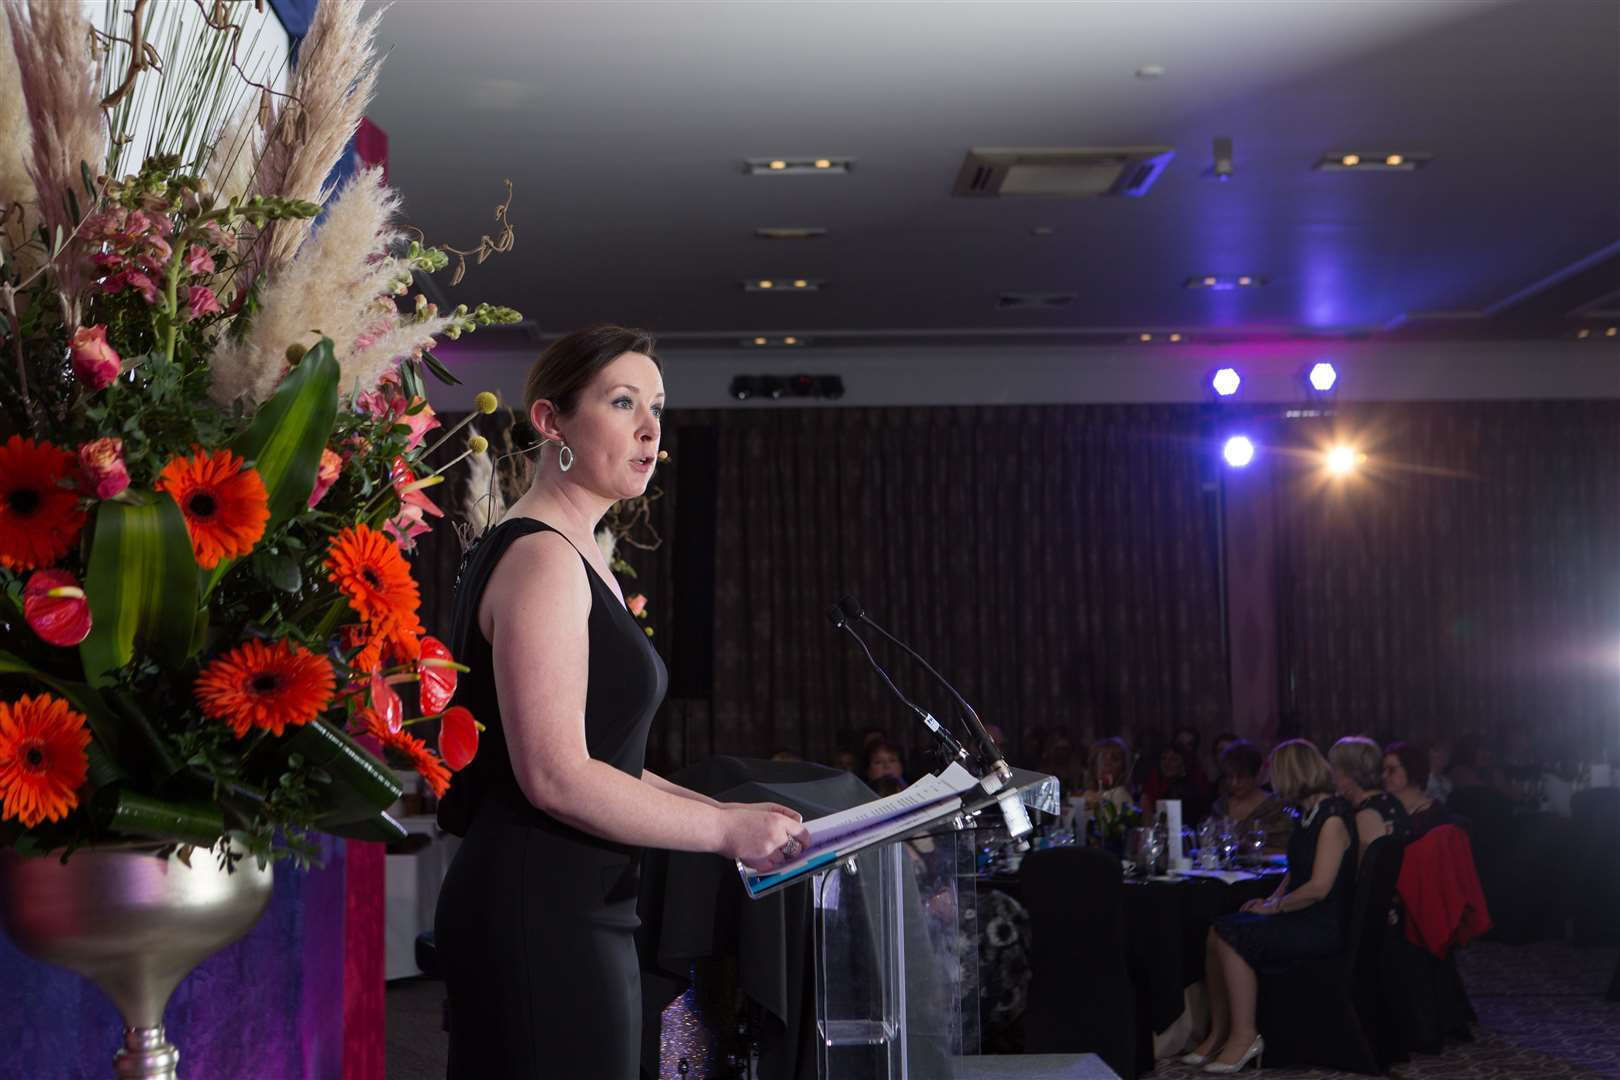 STV reporter Nicola McAlley will resume her hosting duties online at this year's awards.